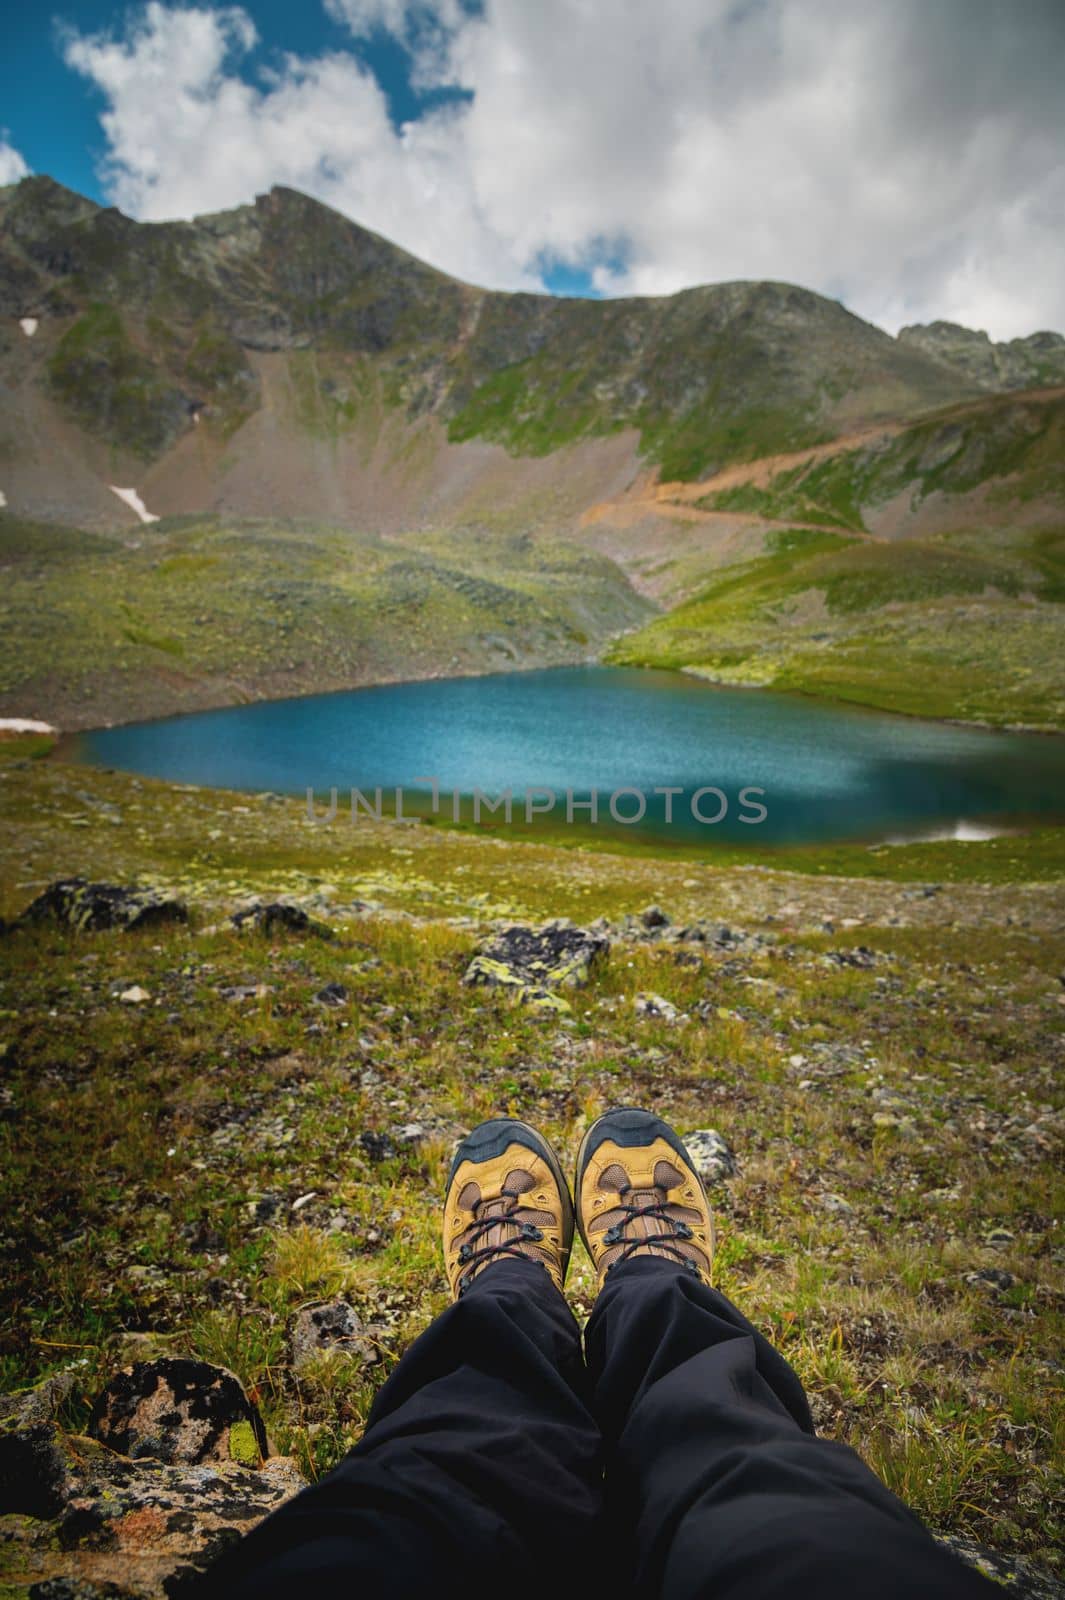 Feet of an alpine tourist in shoes against the backdrop of green mountains and an azure lake. hiking, solitude.